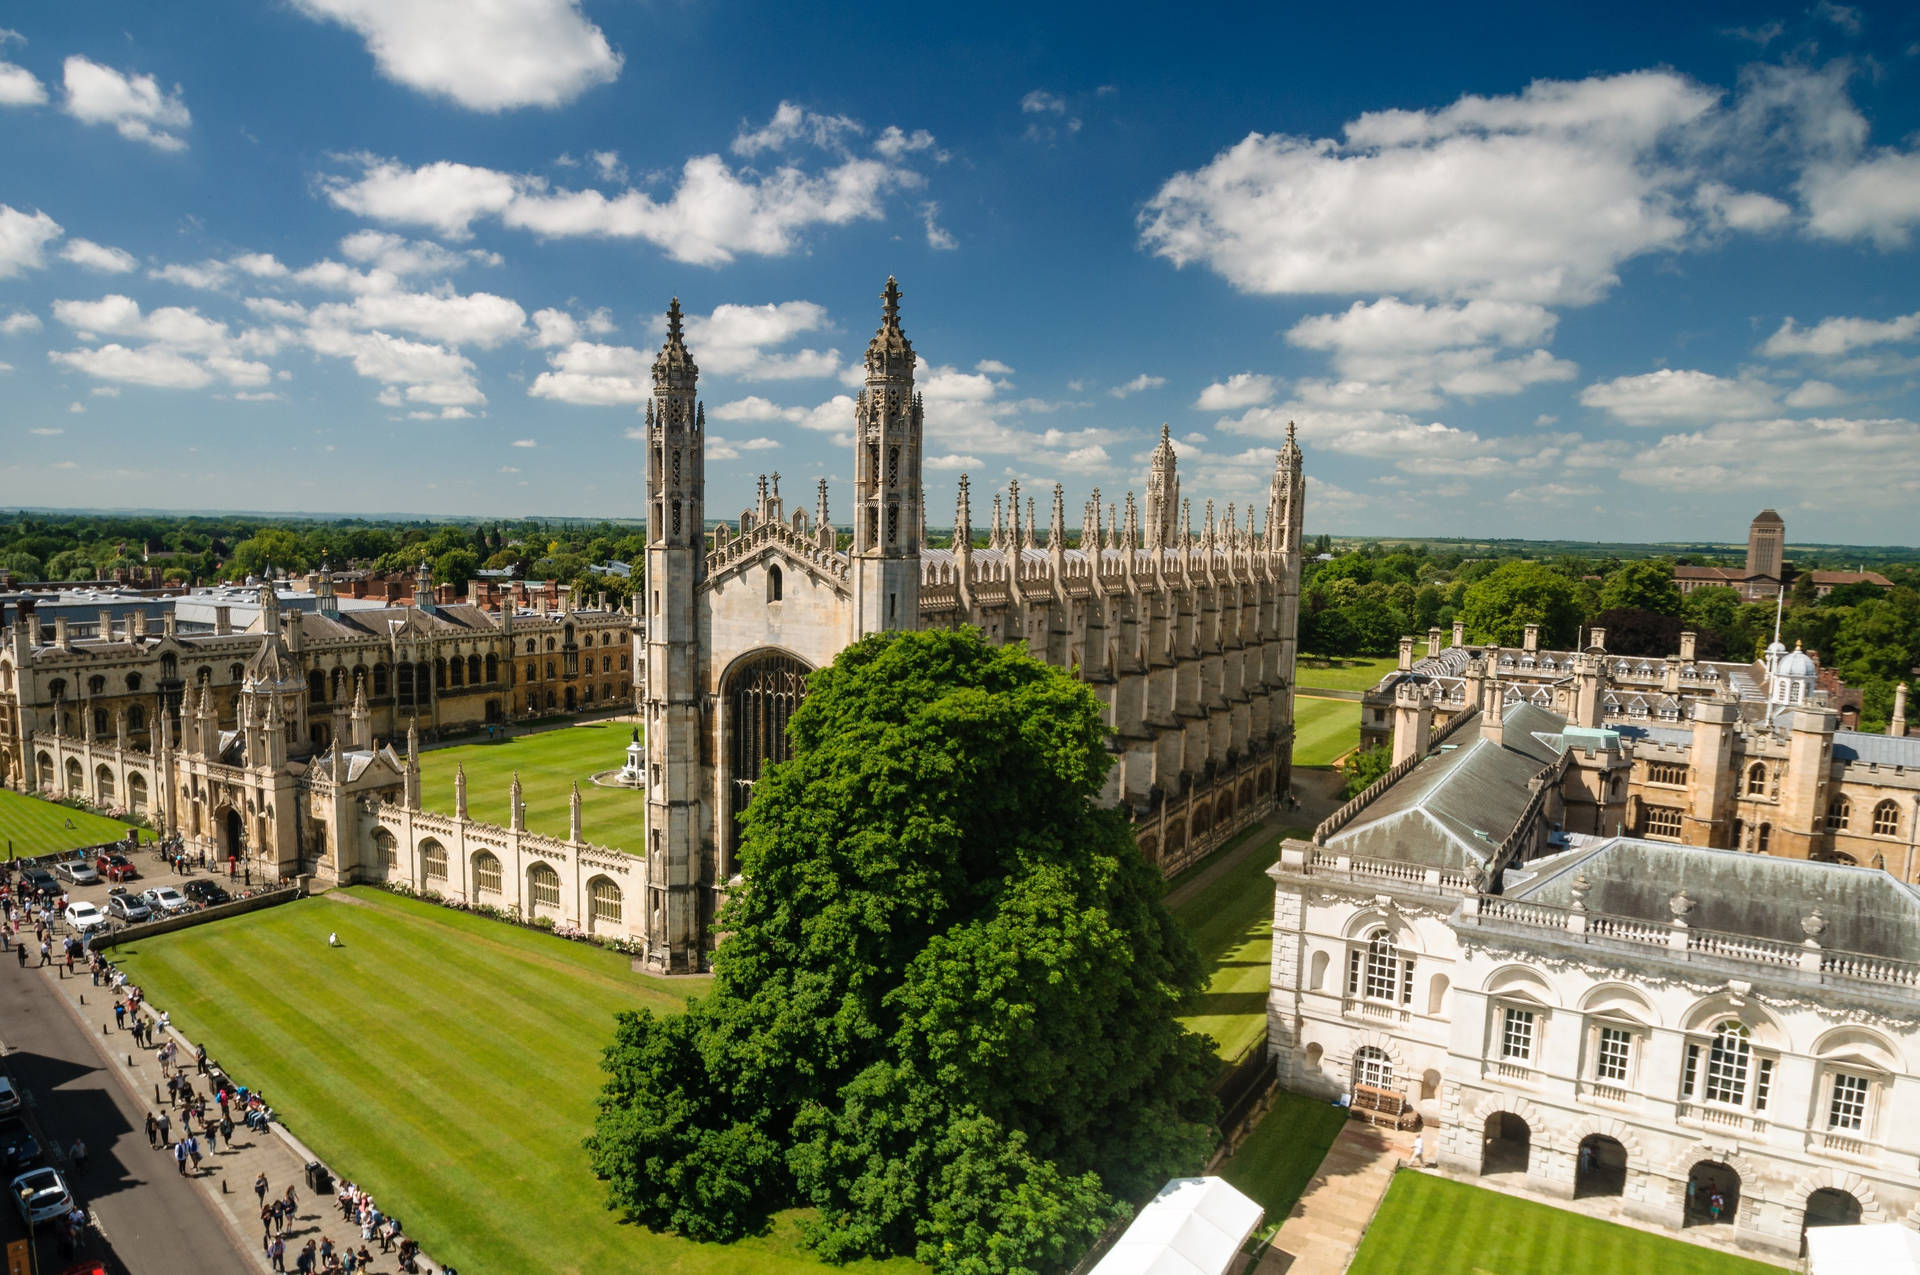 King’s College Cambridge England Picture